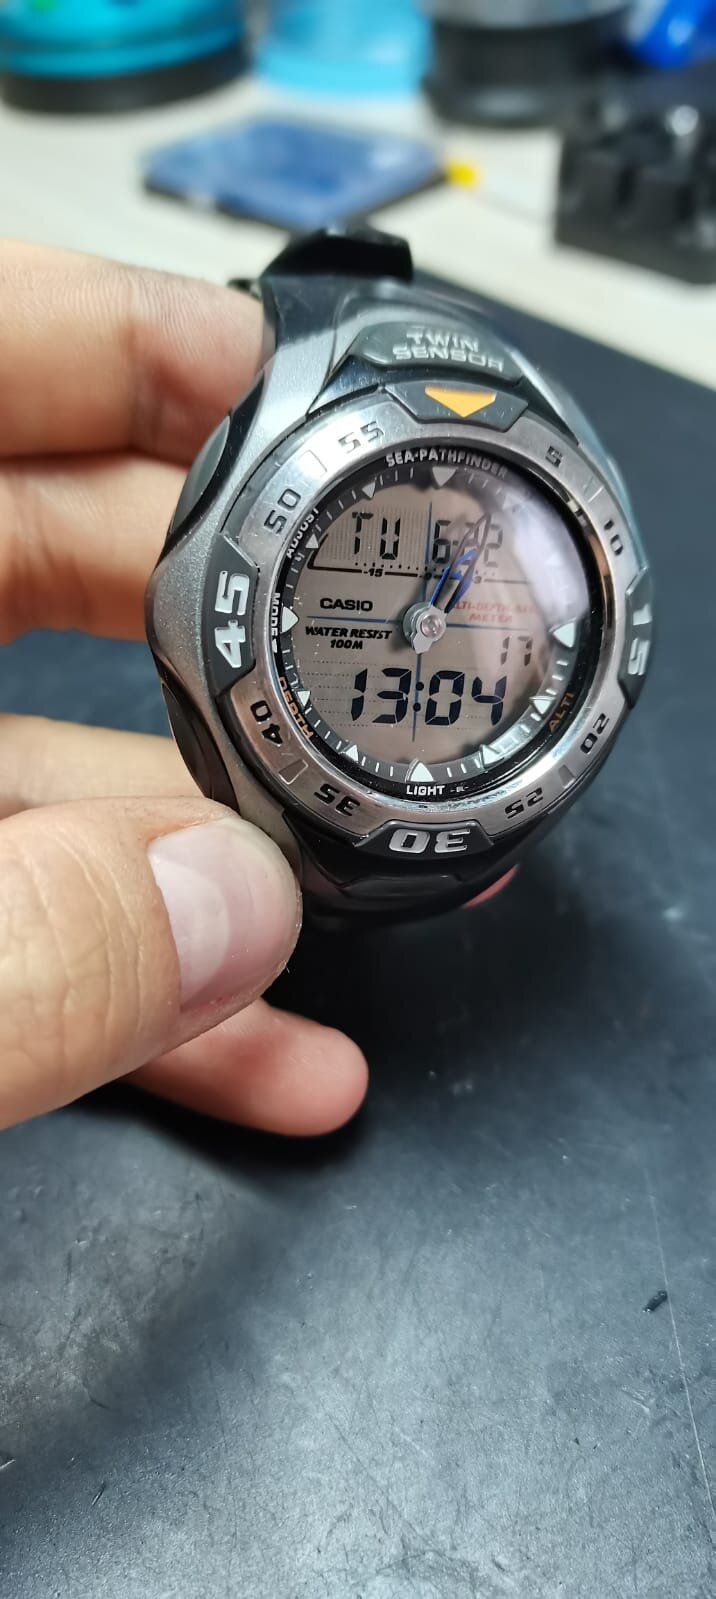 Casio Sea Pathfinder watch repair SPF - 60 in for new battery and reseal from Manchester. Watches | Watch Repairs | Latest Watch News | Watch Hub